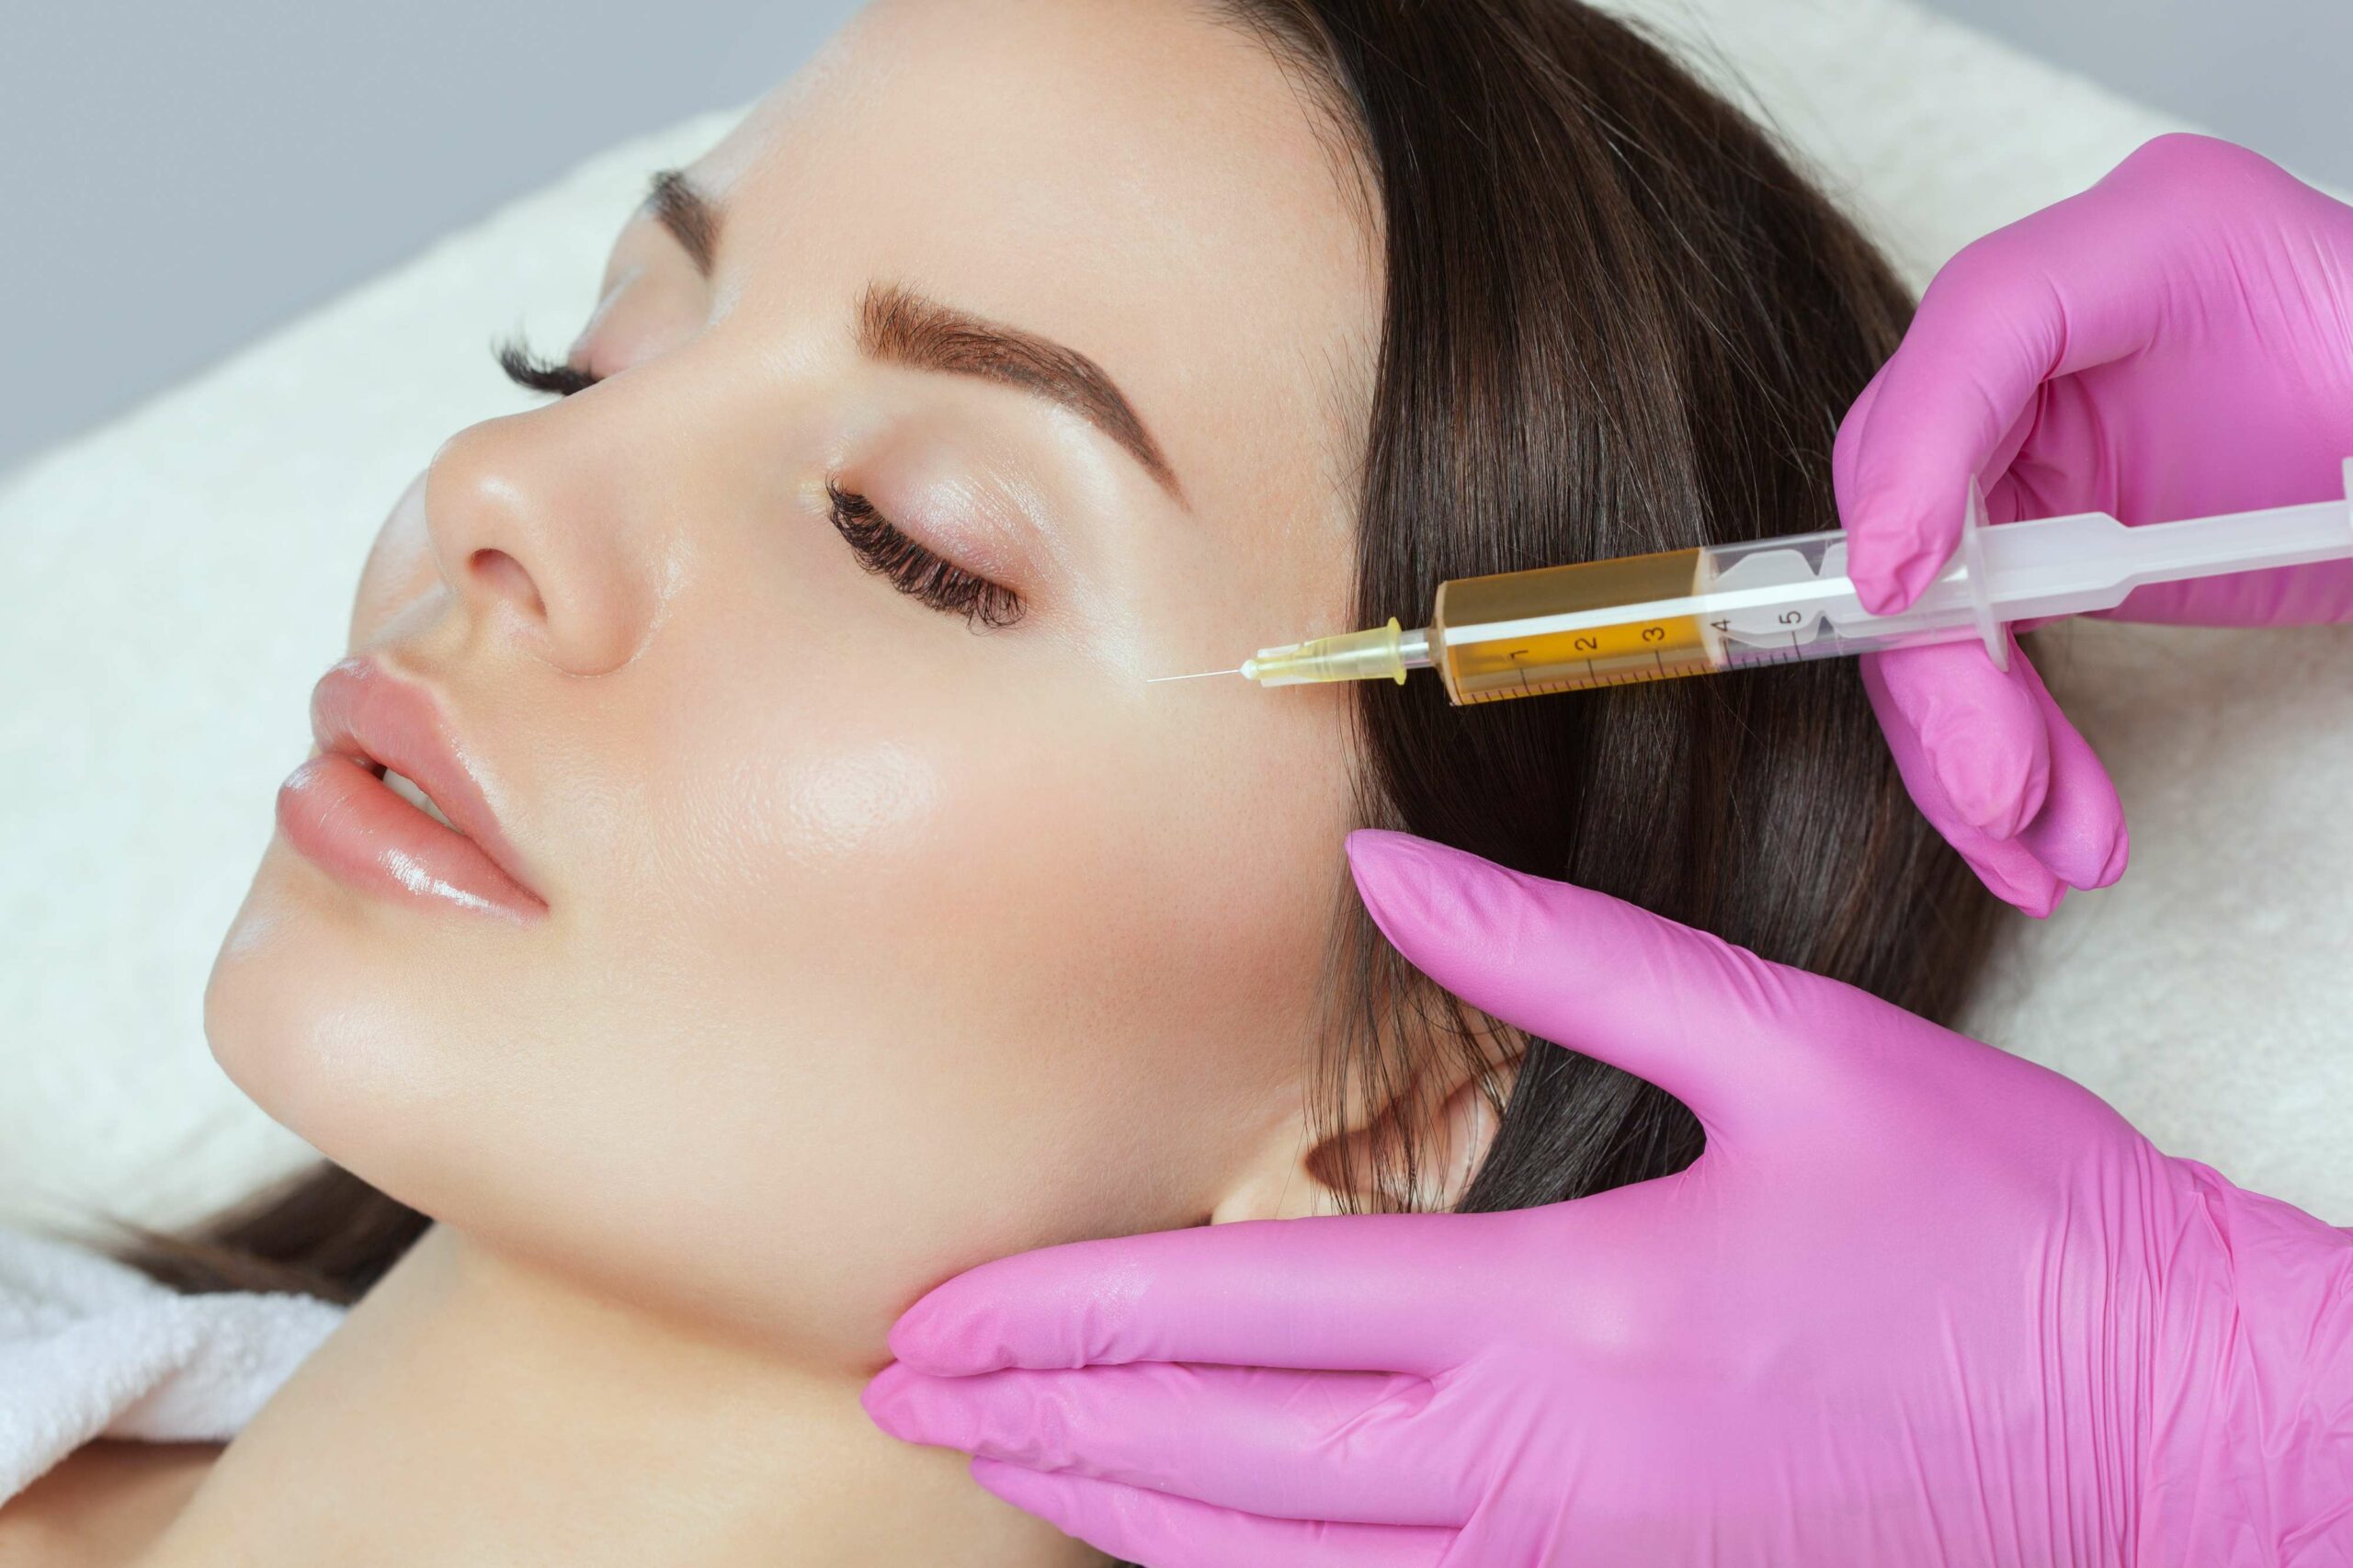 The pretty lady receiving injection near eye | Collagen Stimulators in Beauty Boost Med Spa at Newport Beach, CA